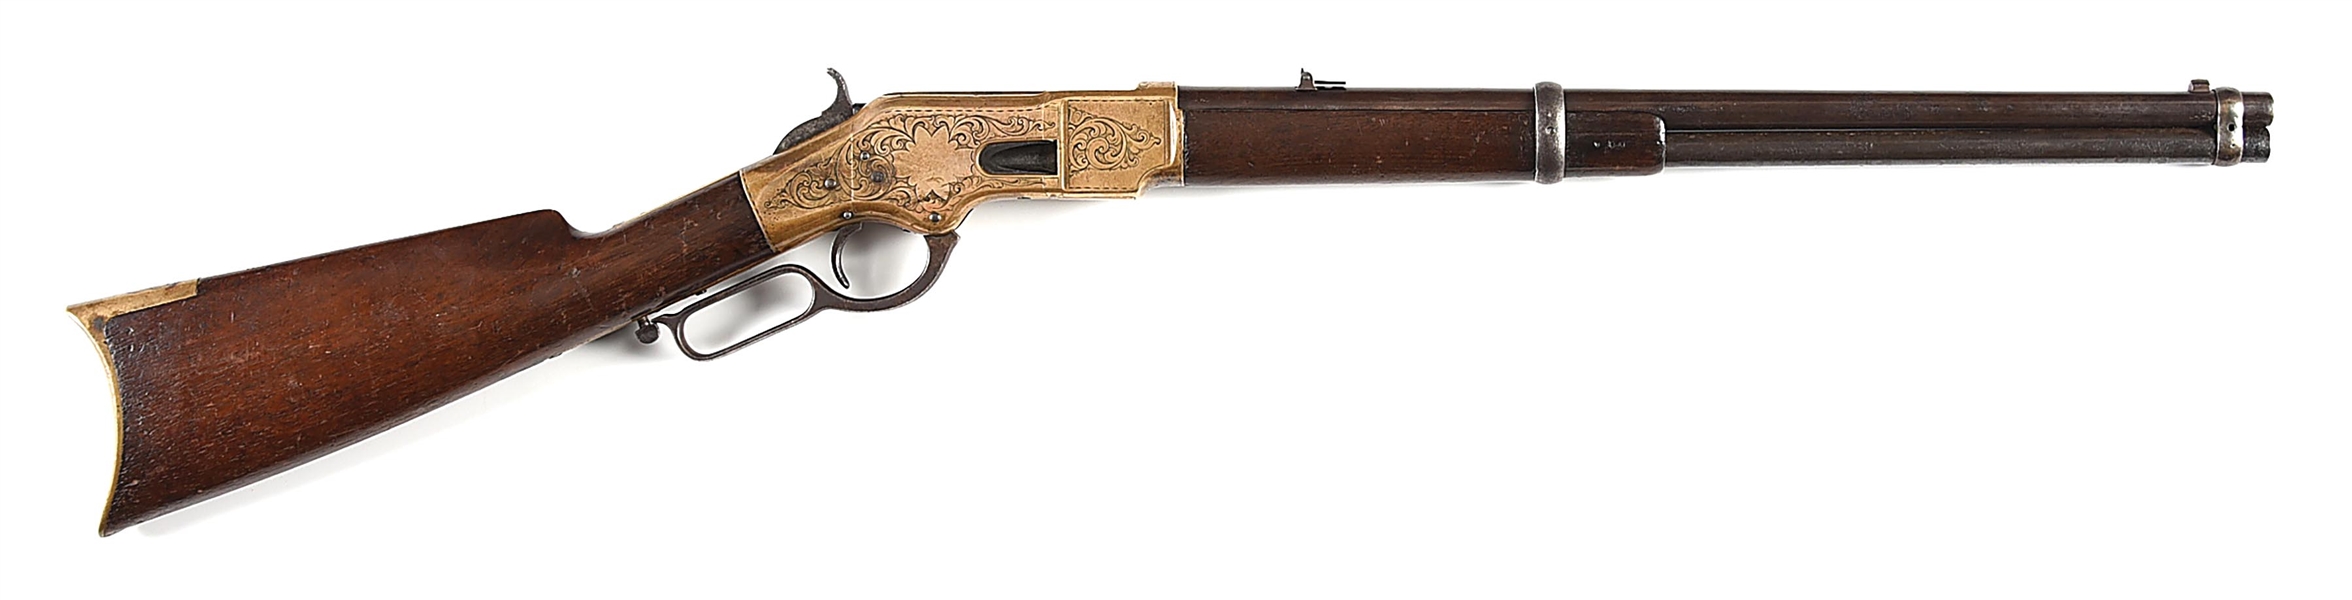 (A) FACTORY ENGRAVED WINCHESTER MODEL 1866 LEVER ACTION CARBINE WITH MEXICAN EAGLE, ATTRIBUTED TO THE ULRICH BROTHERS.